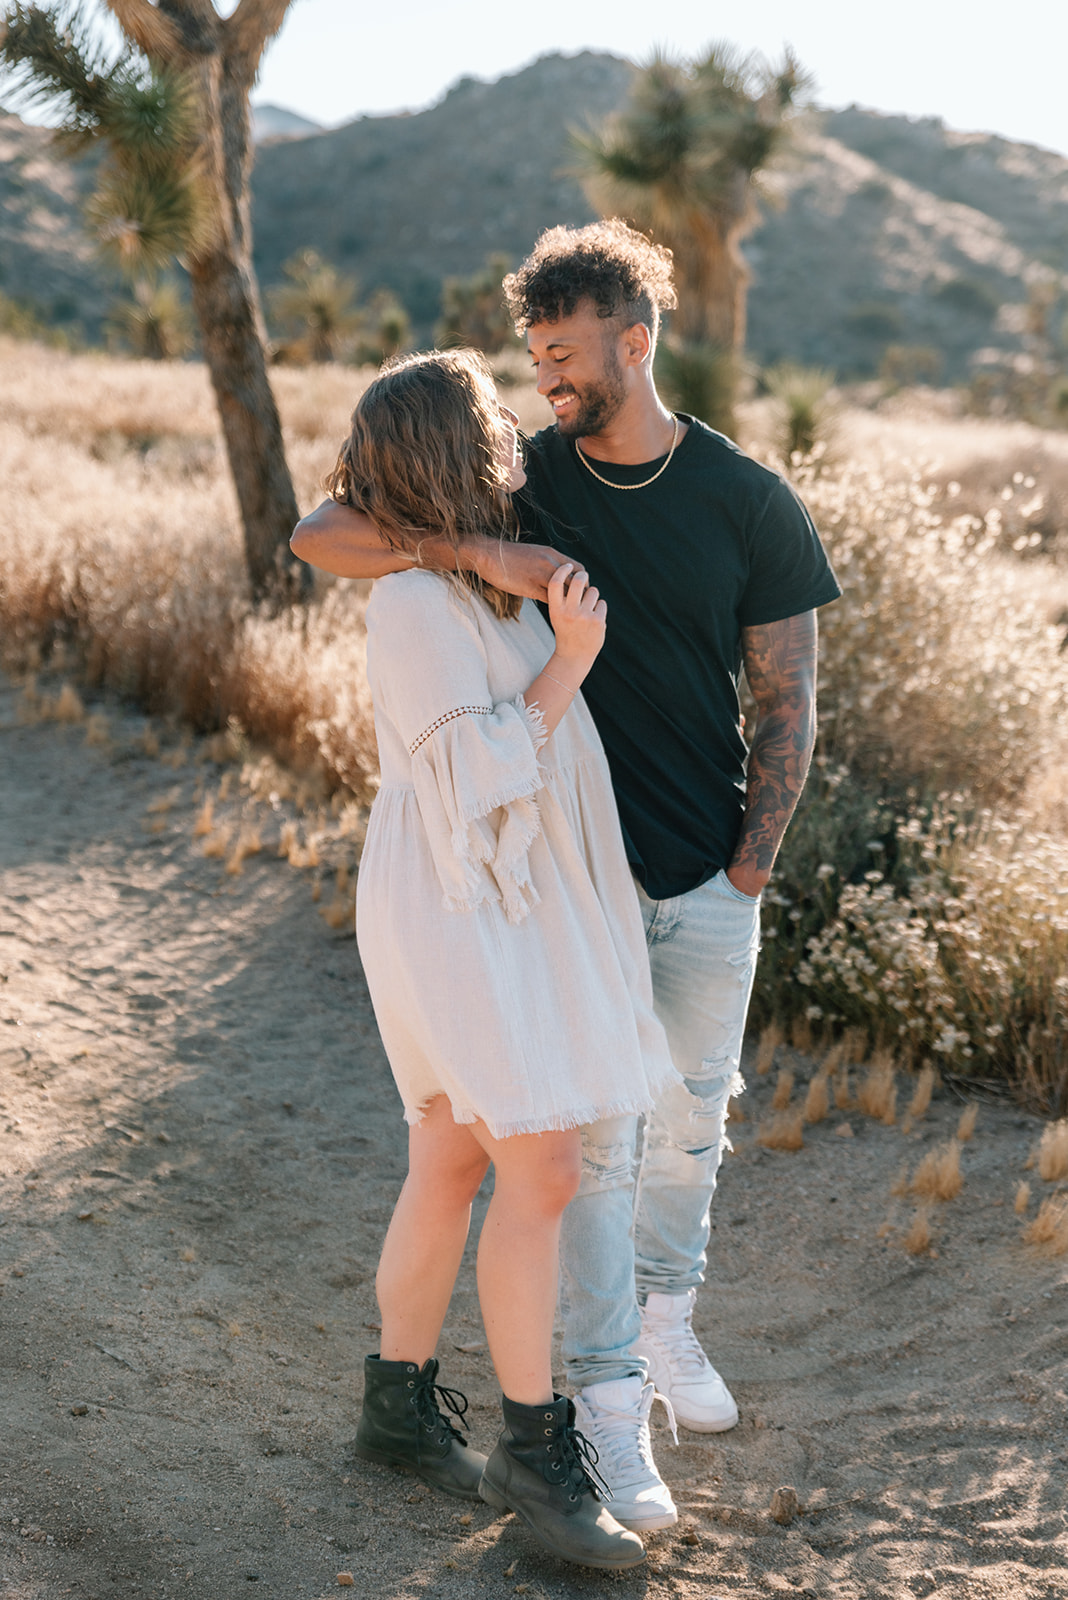 Man casually drapes his arm over his fiance's shoulder as they gaze at each other during their desert engagement session